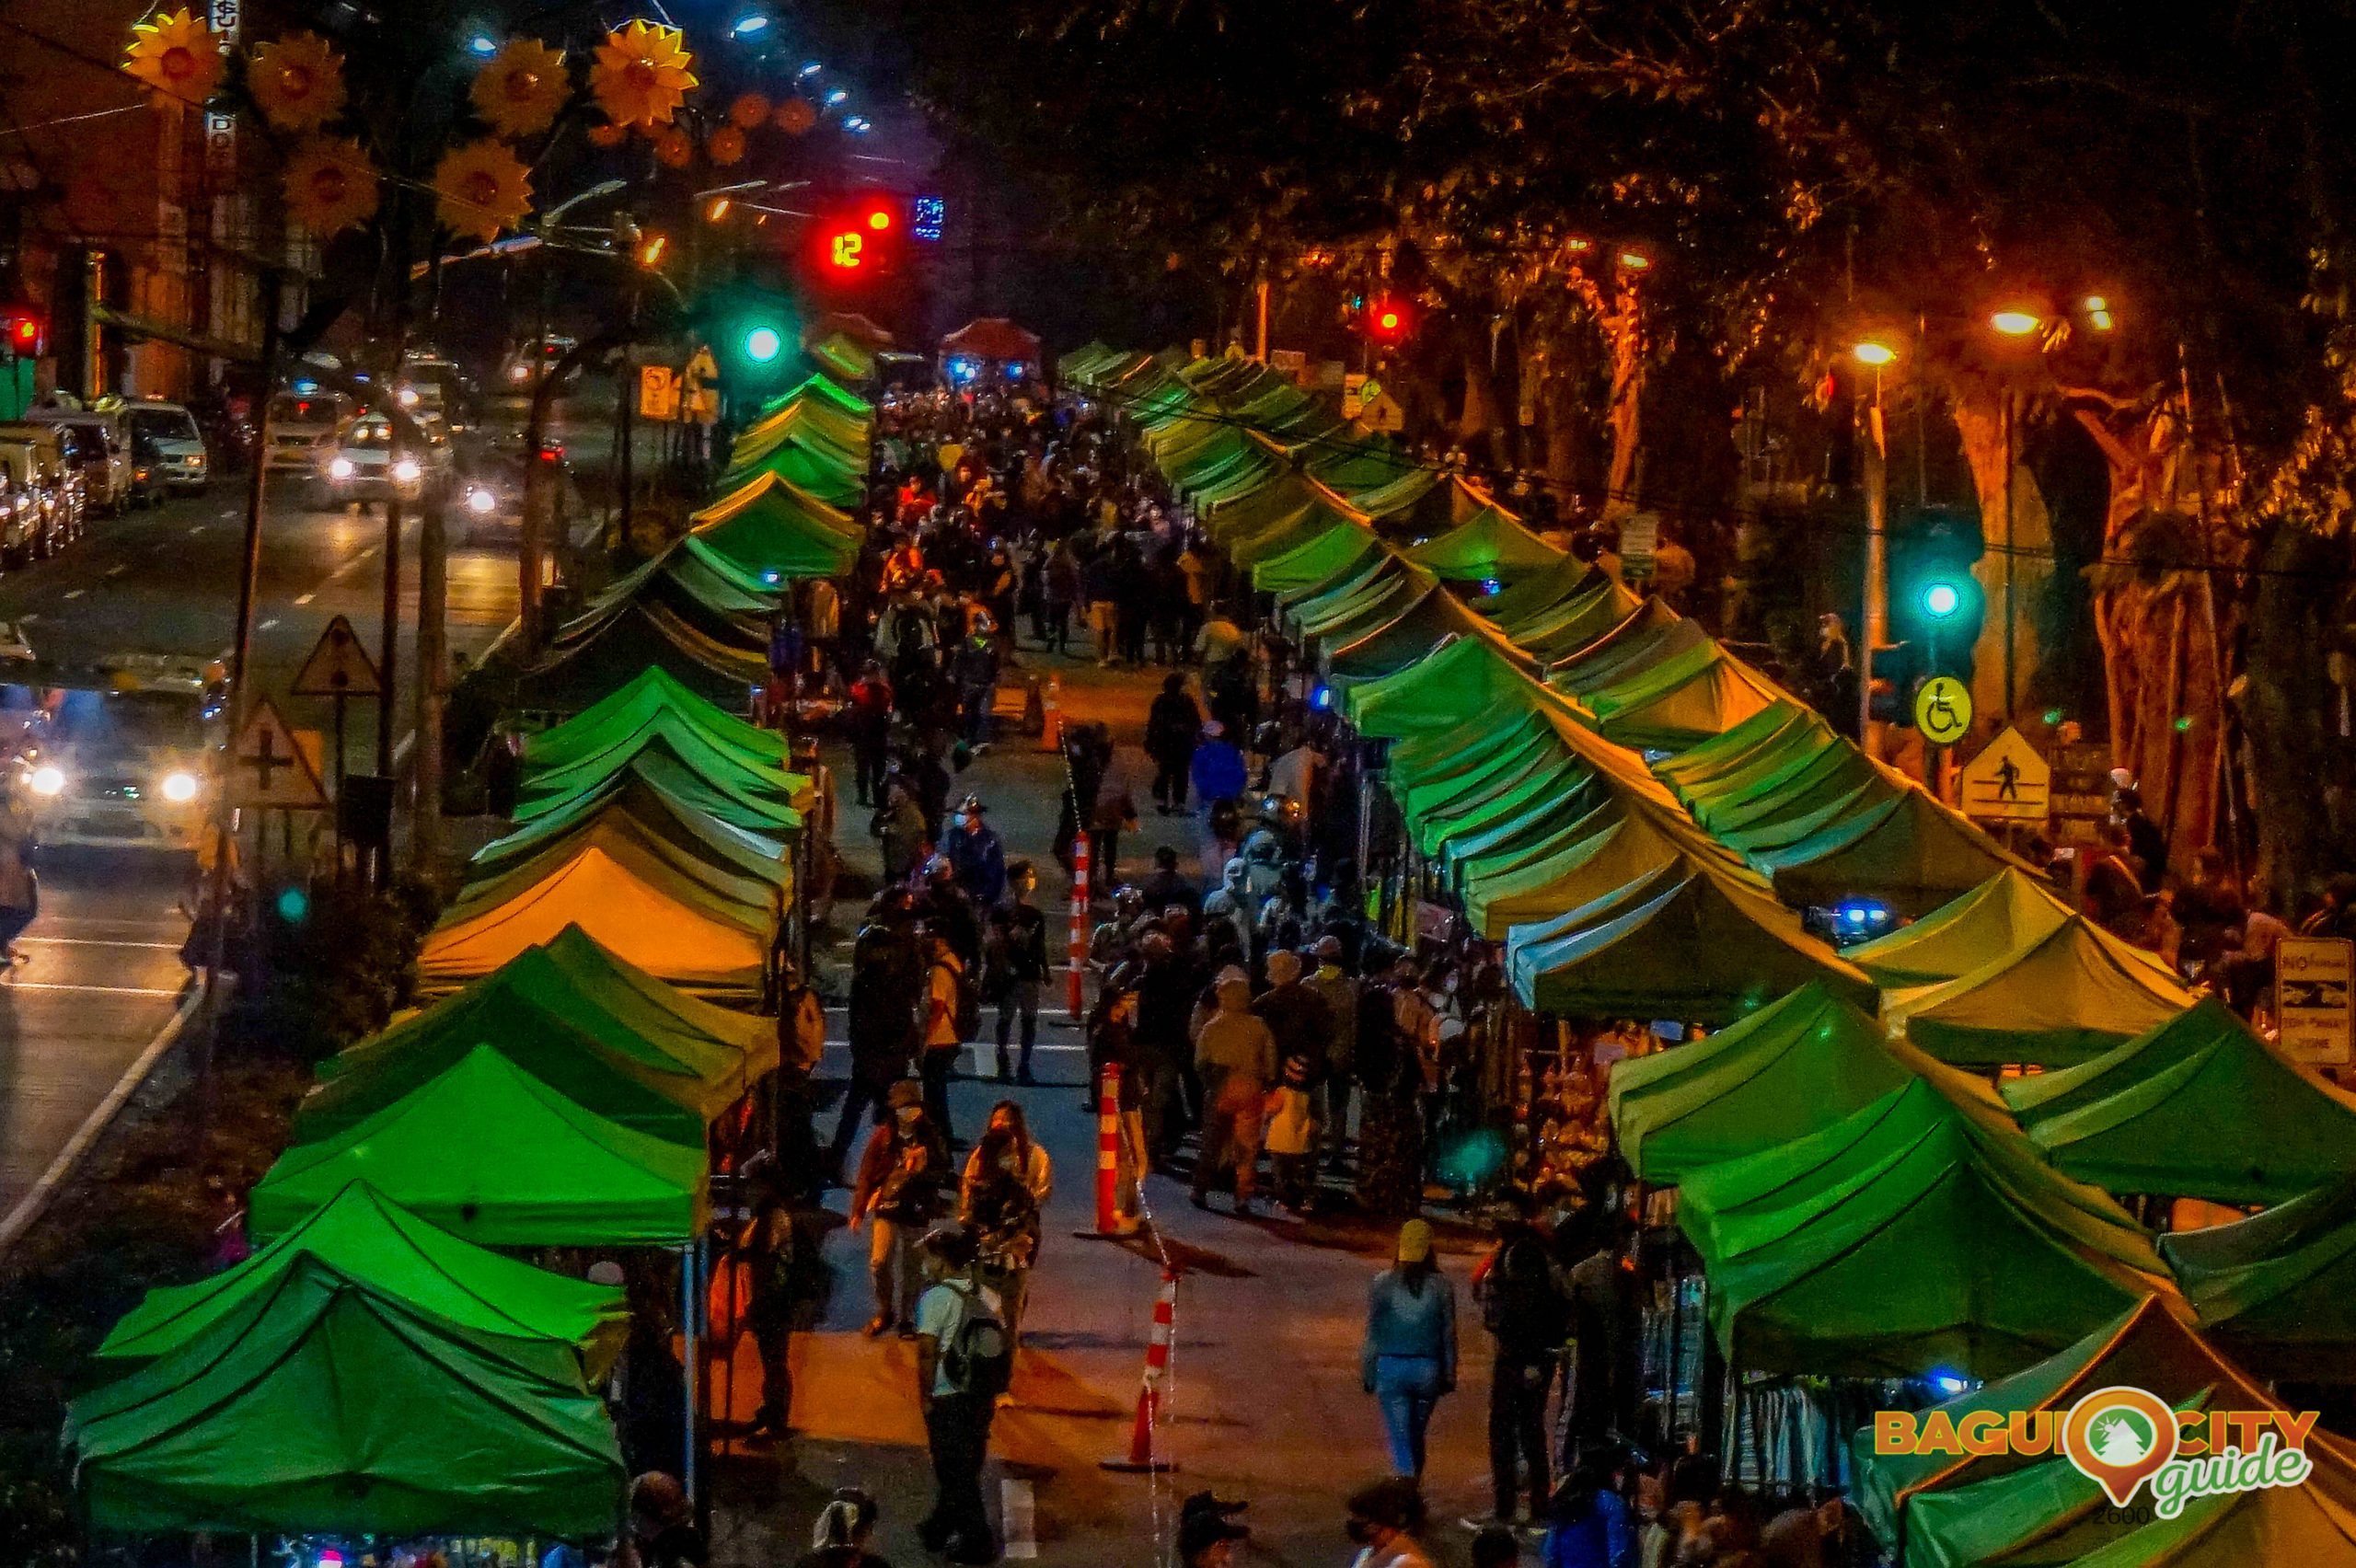 After reopening yesterday, Baguio city Mayor suspends night market